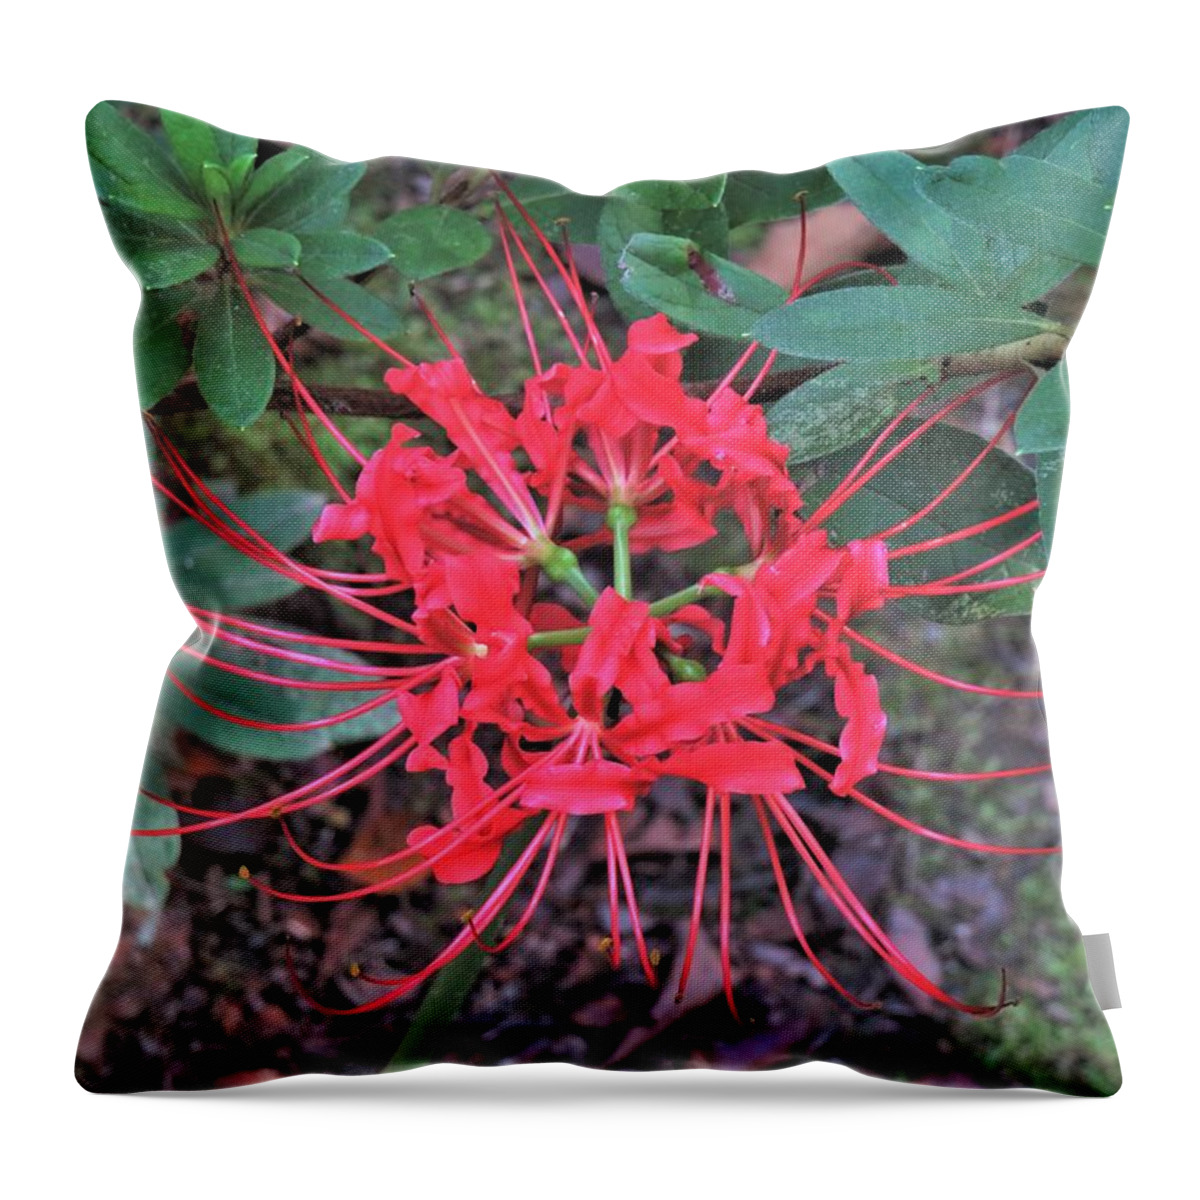 Flower Throw Pillow featuring the photograph Red Spider Lily Stare by Ed Williams